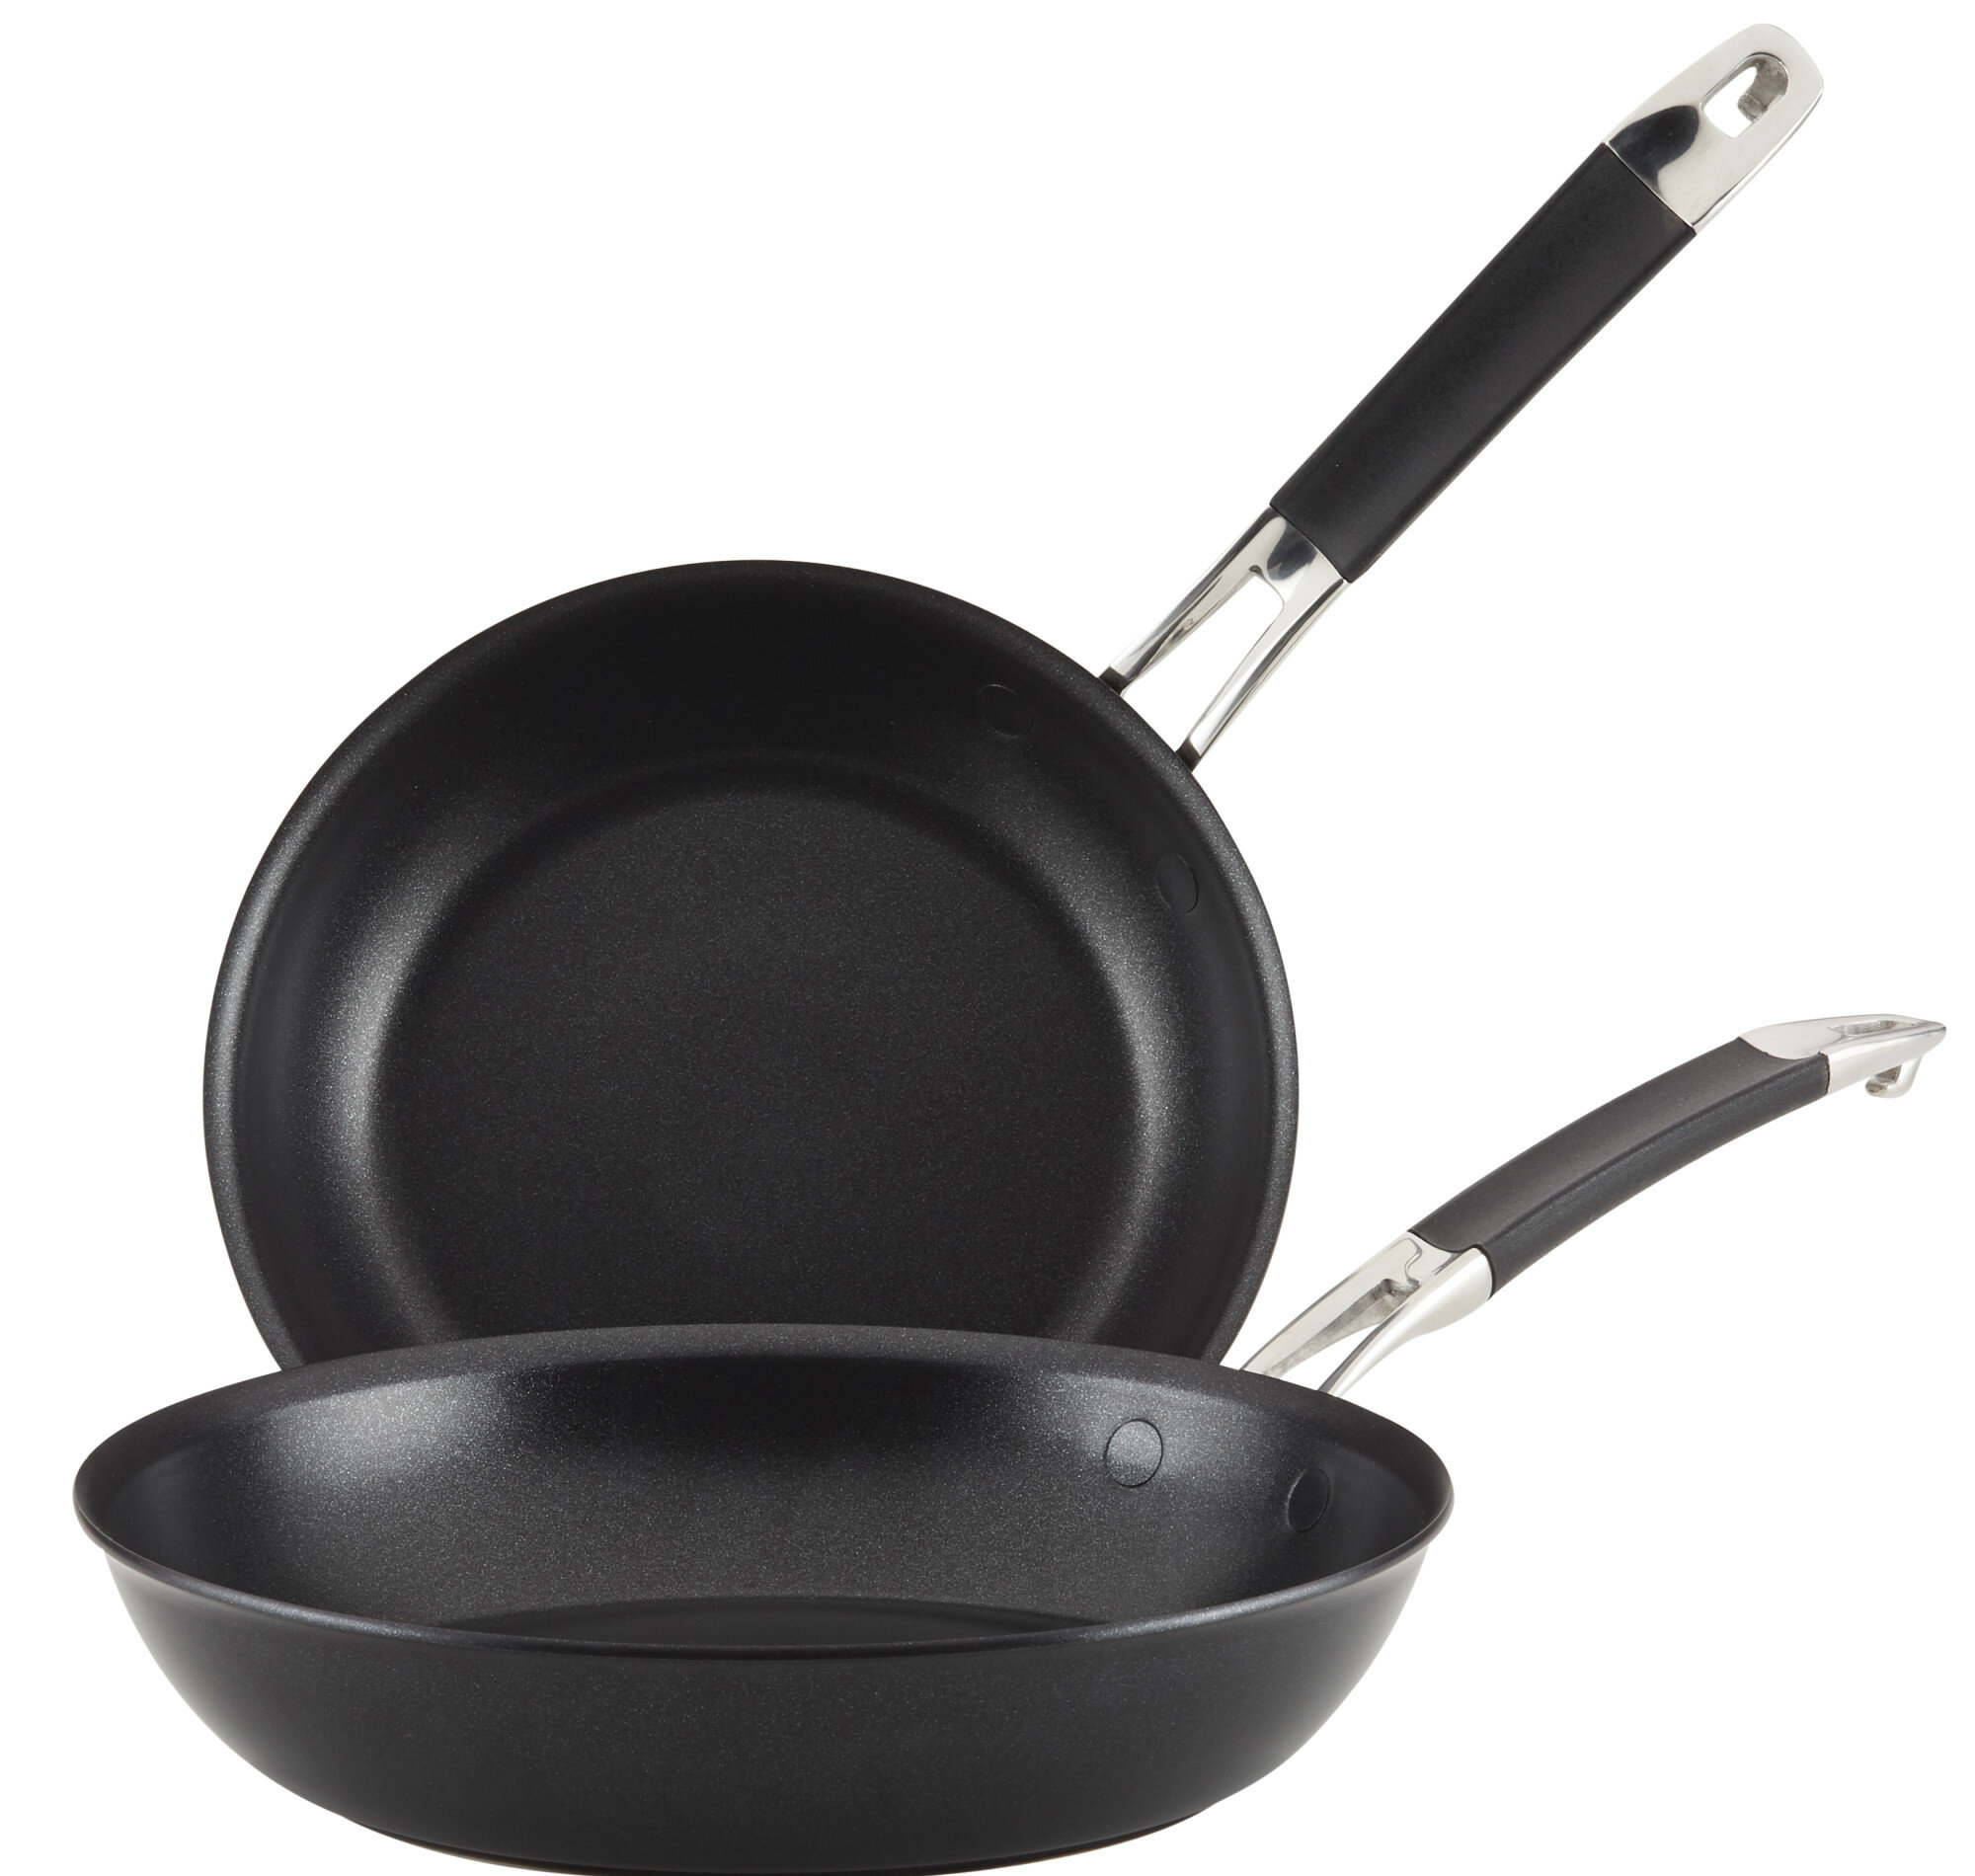 Calphalon Premier Hard-Anodized Nonstick 13-Inch Deep Skillet with Lid 